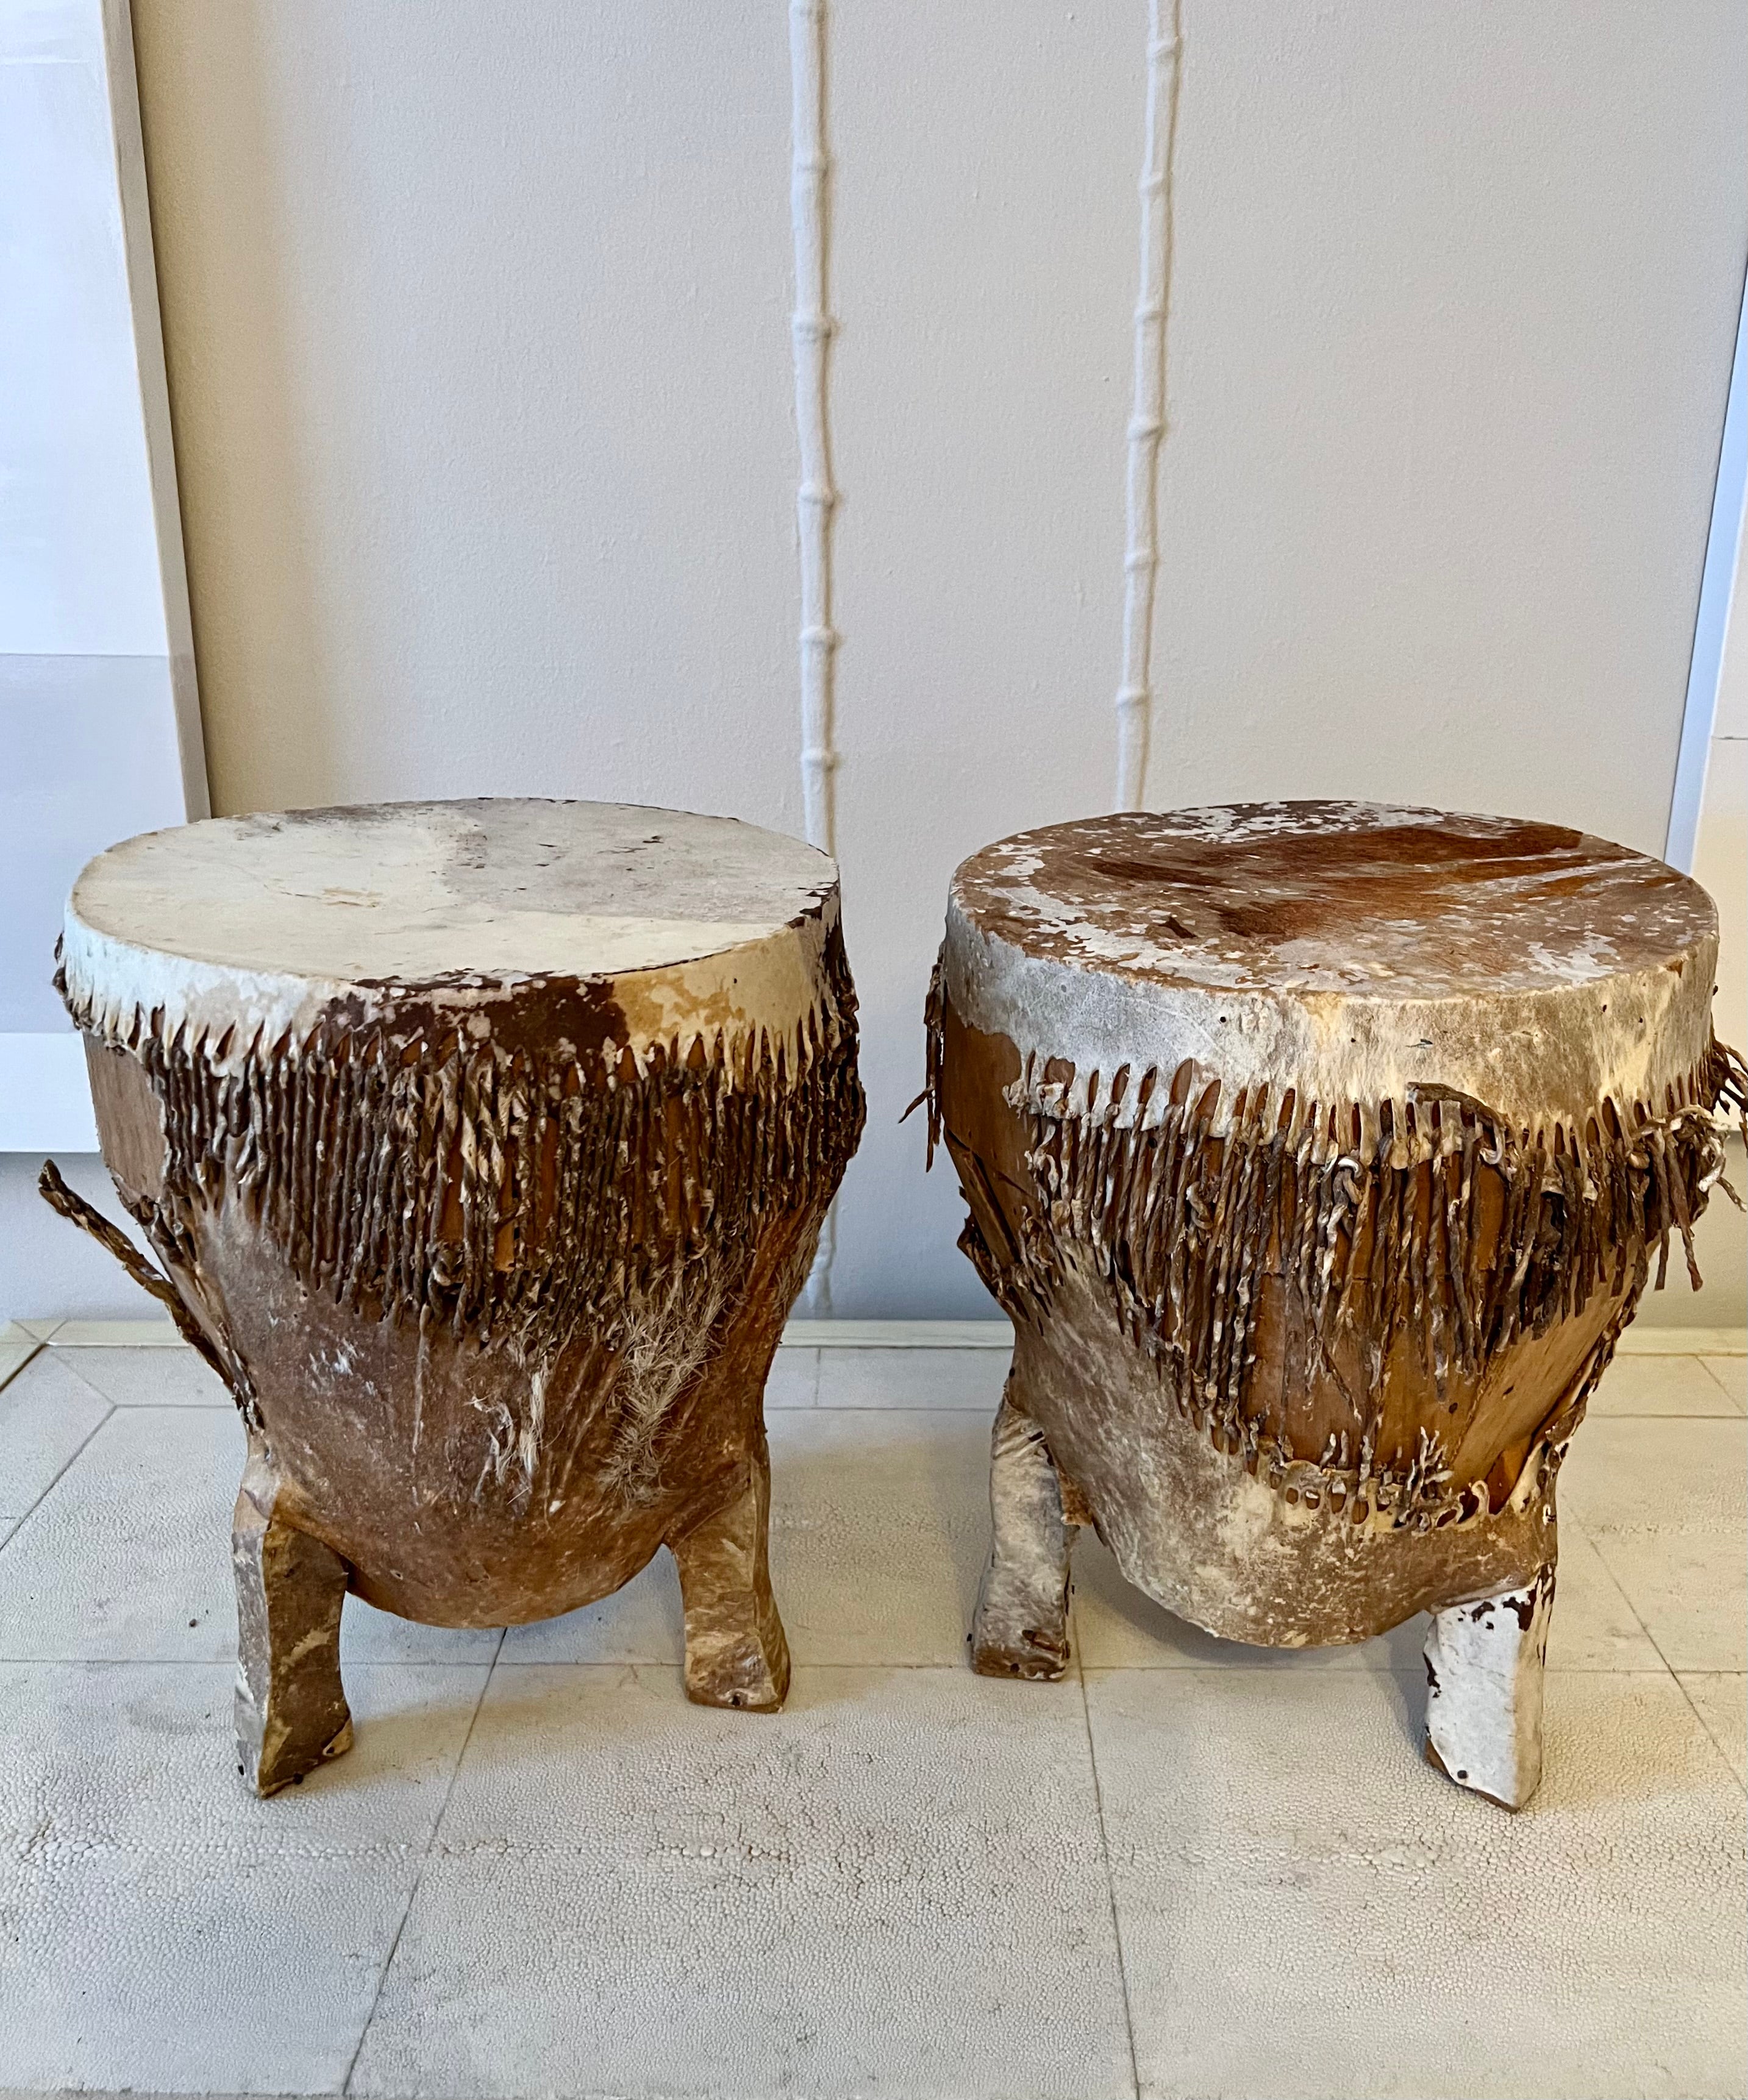 Beautiful pair of African zebra drums. Great side table or beat it! Heavily patinated, gives these a more whitewashed look - a wonderful textural addition to any room. A compliment to ethnic or tribal interiors. We love the very worn look of the